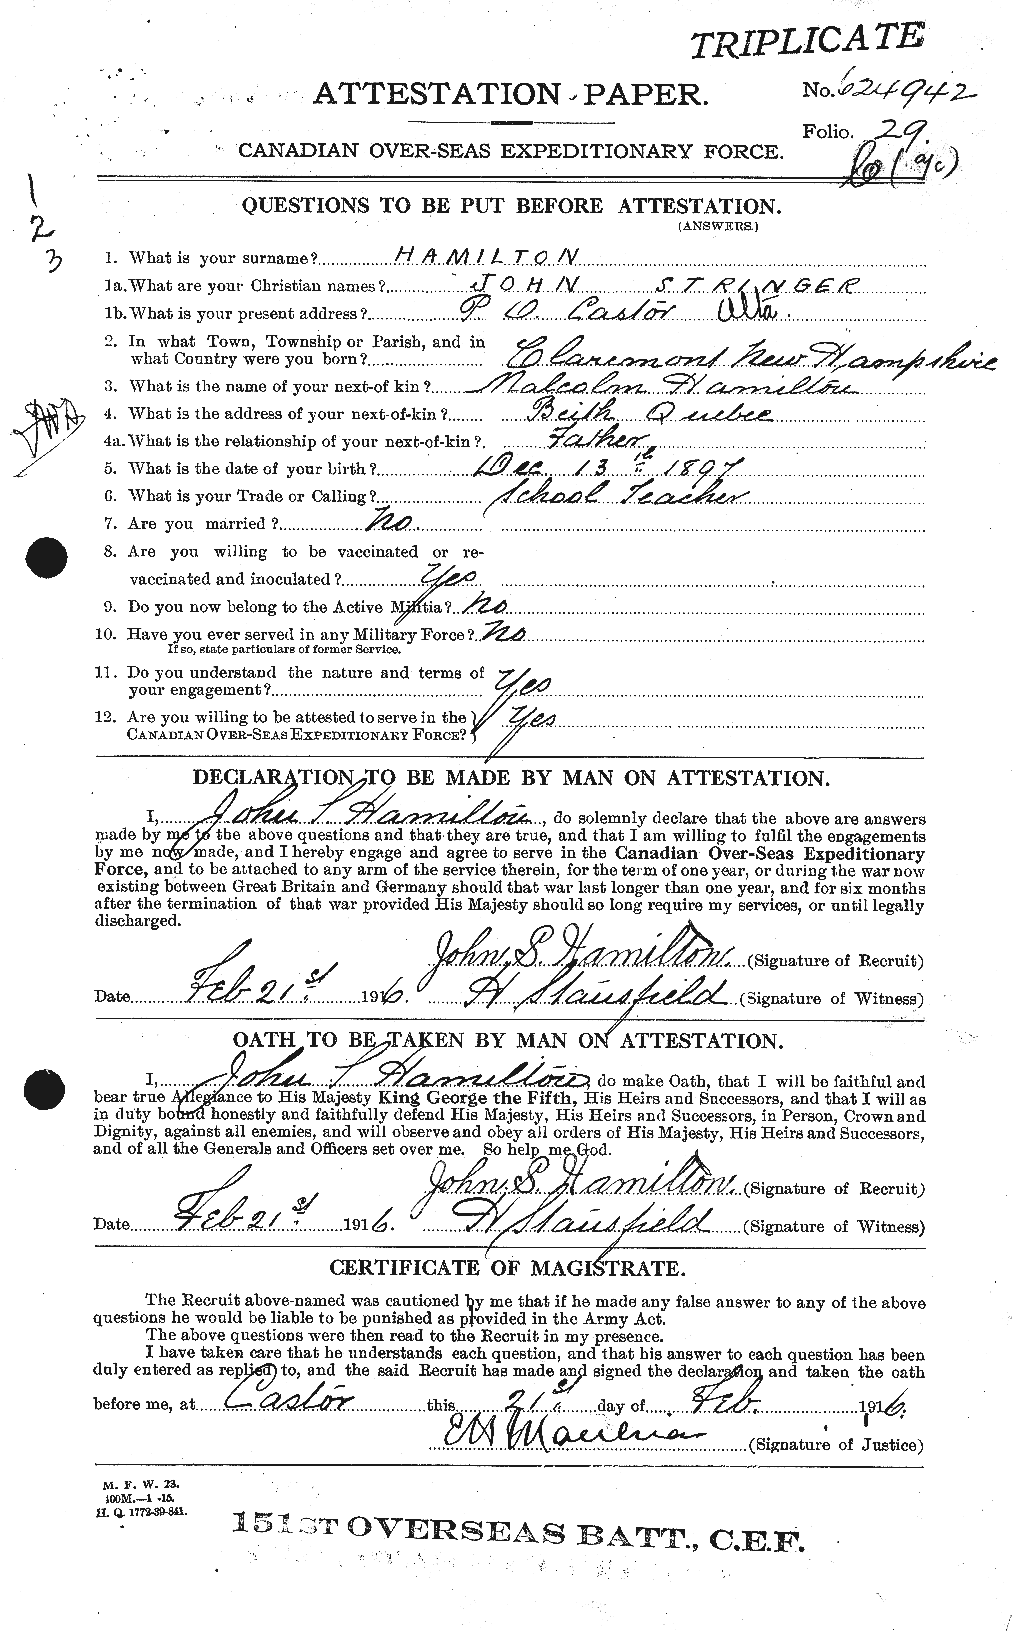 Personnel Records of the First World War - CEF 373125a